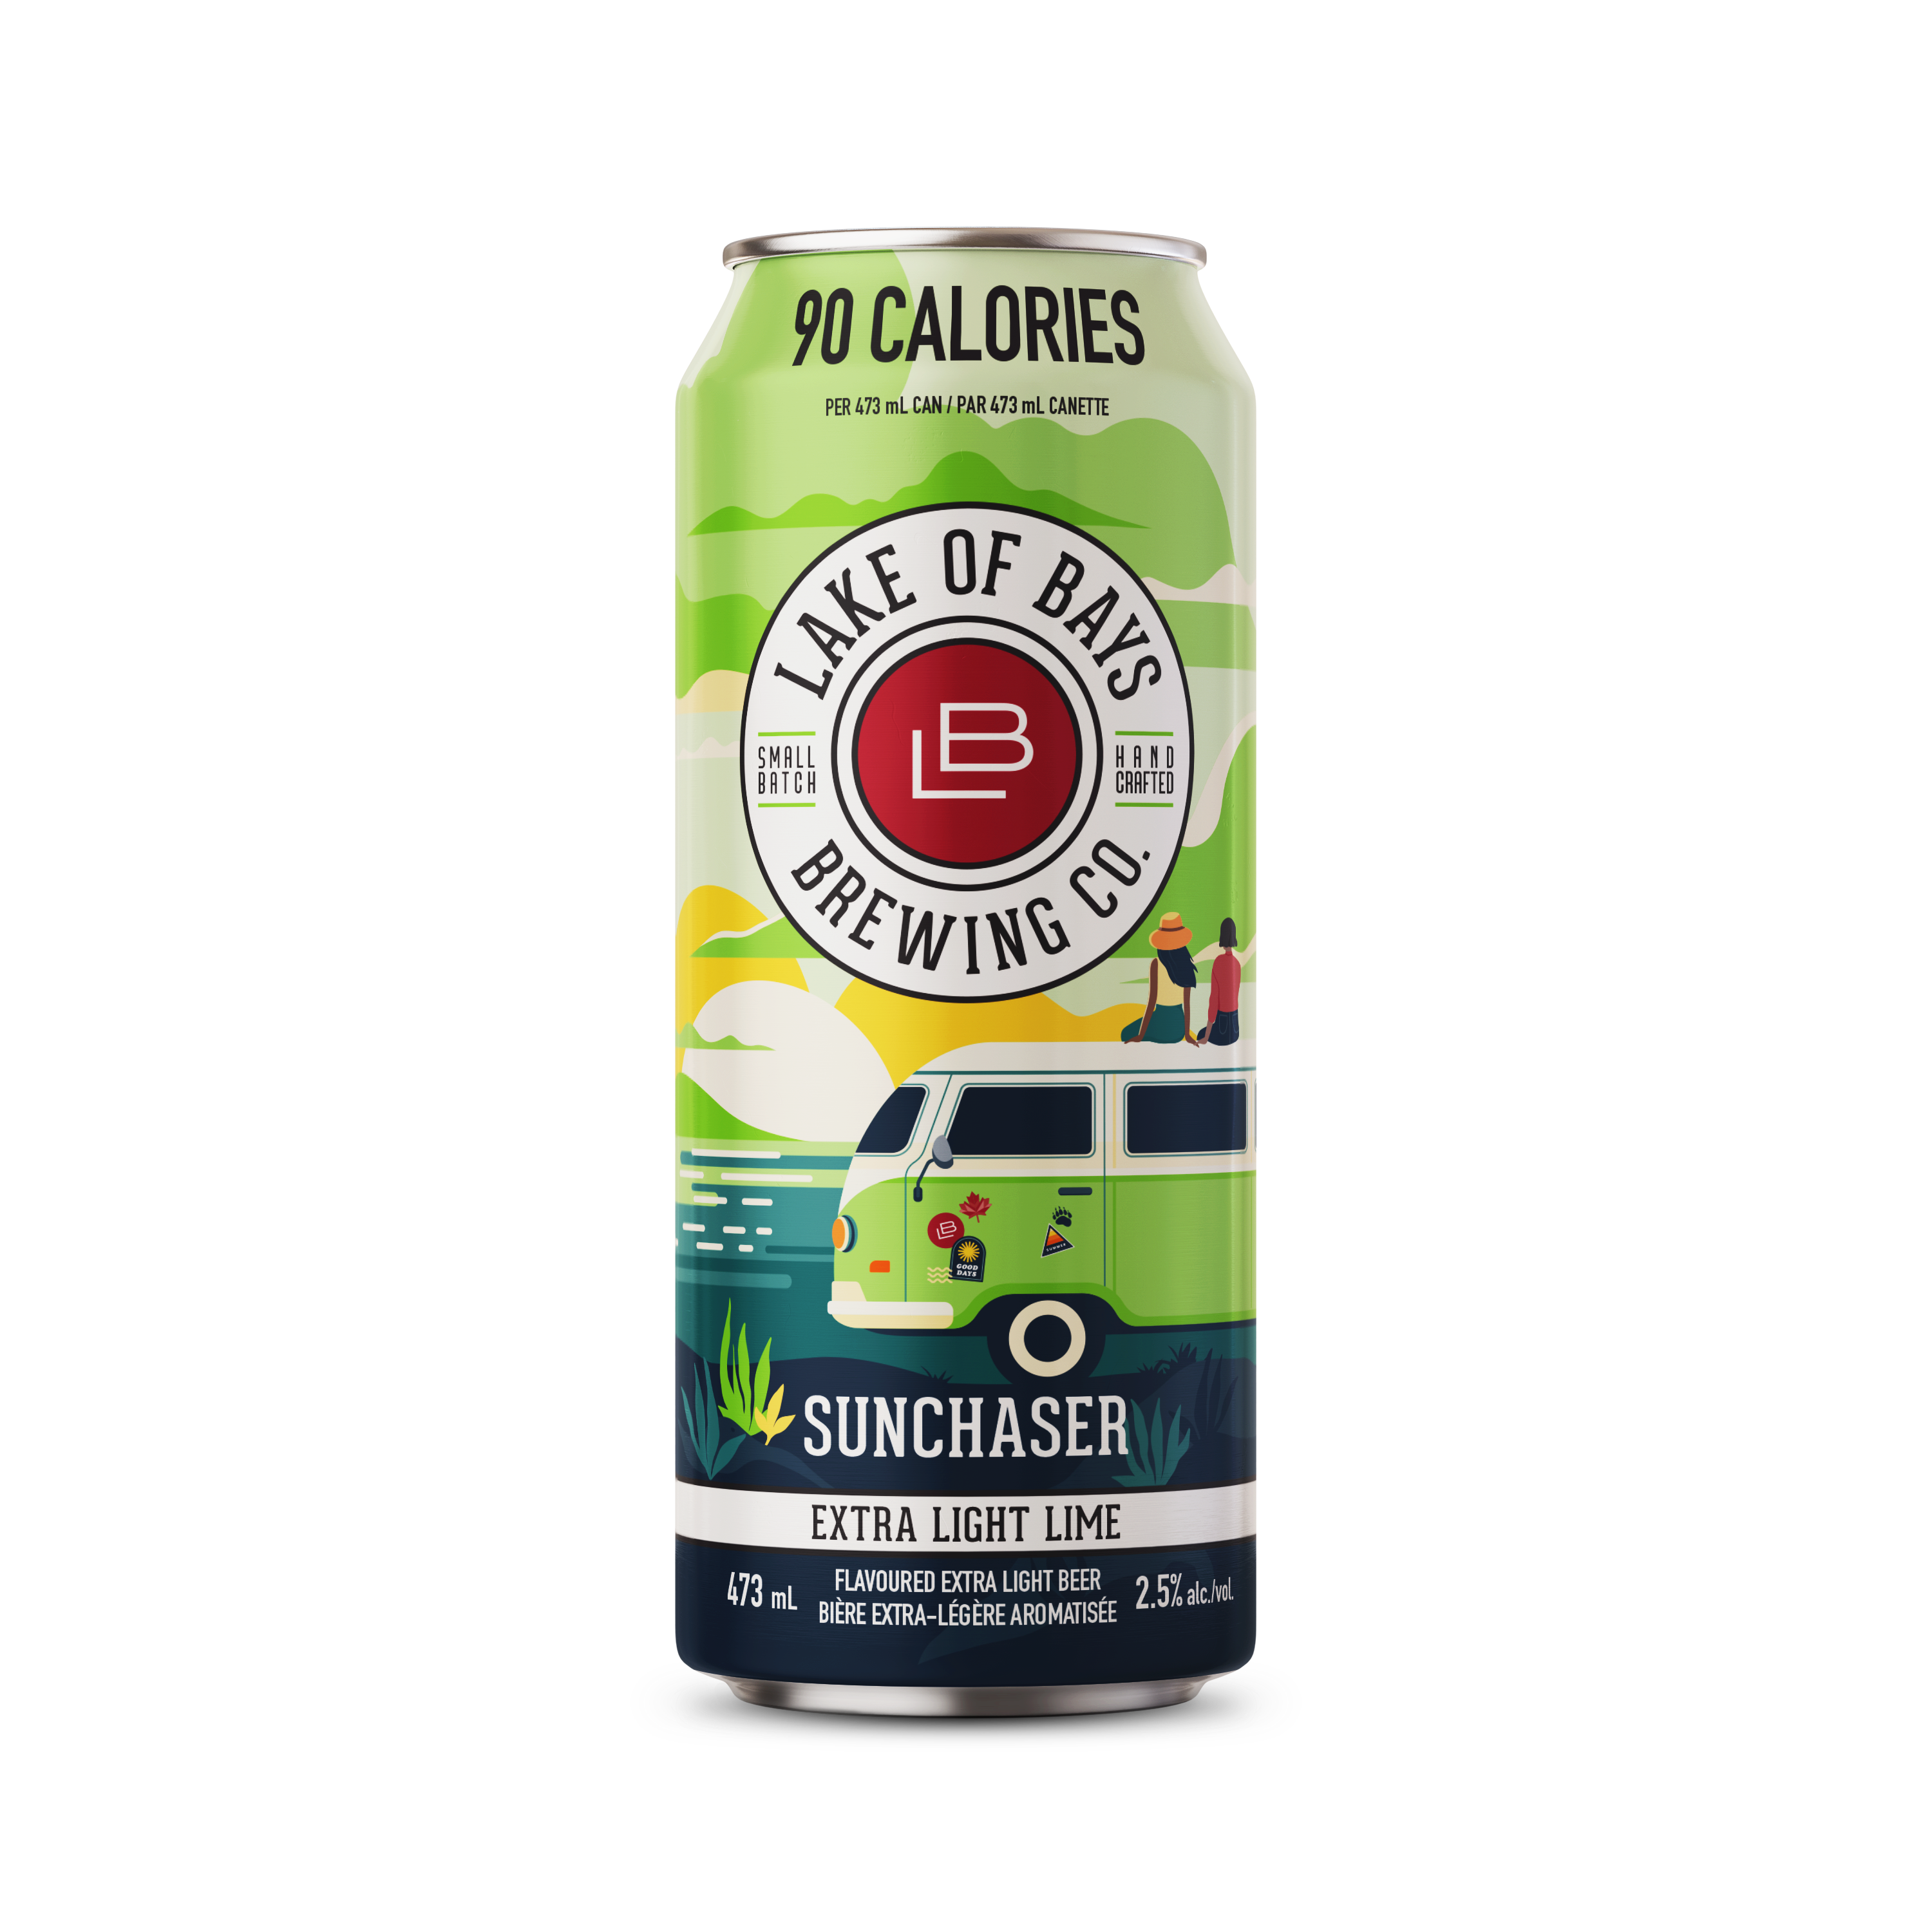 Sunchaser - 90 Calories - 2.5% ABV - Extra Light Lime Lager